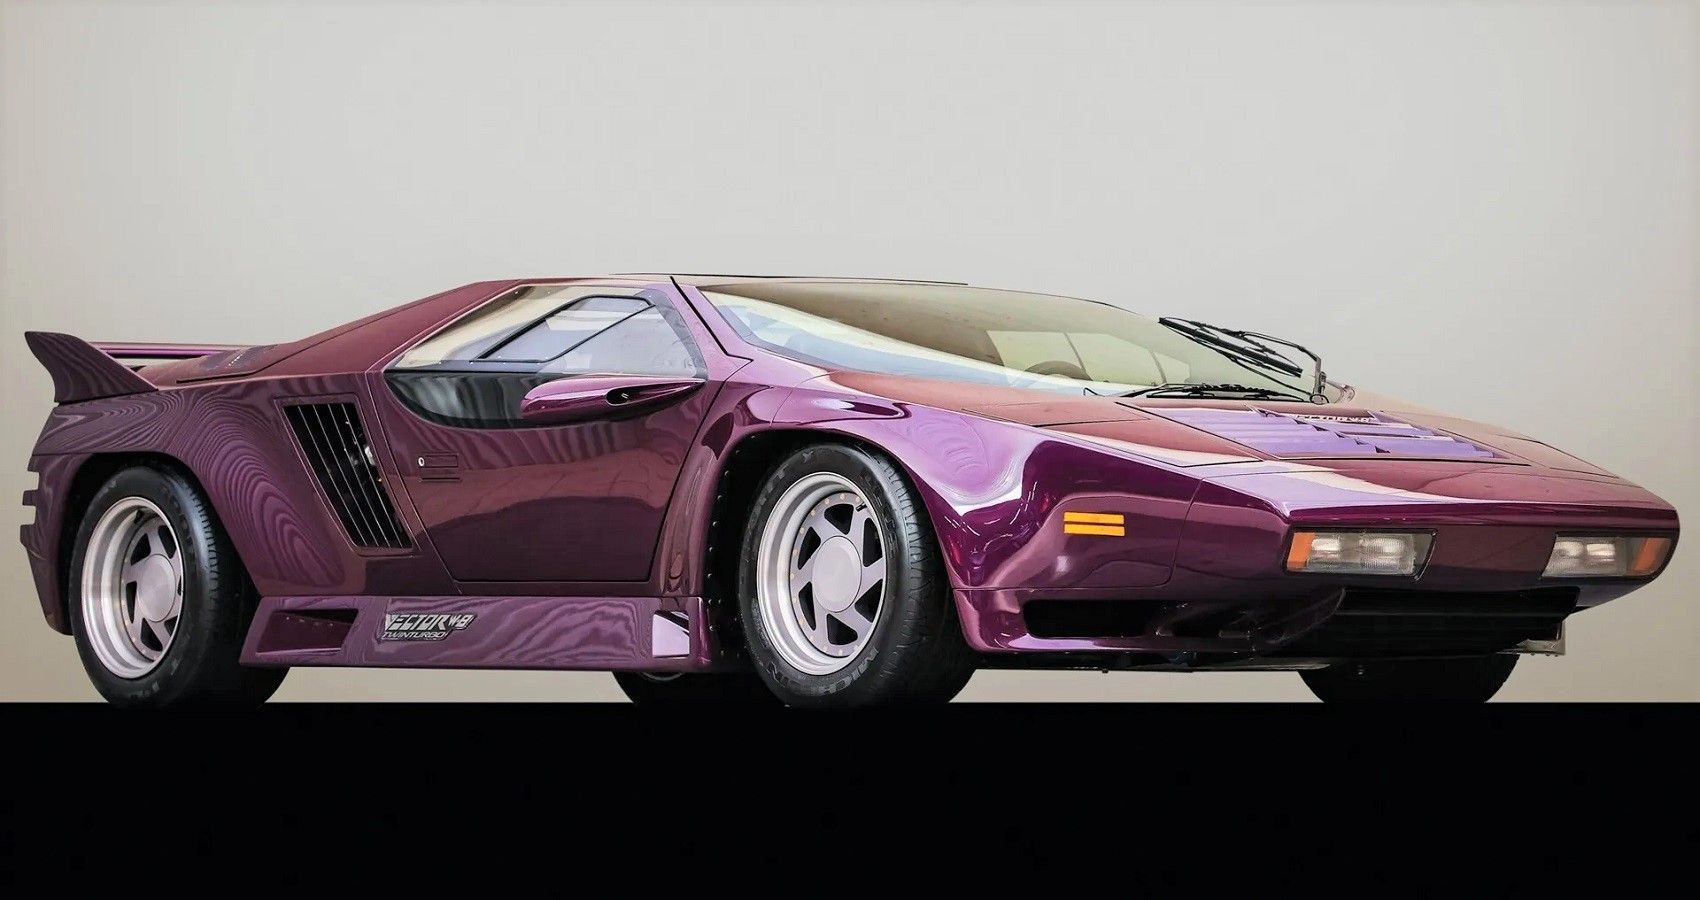 The Story Behind A Failed American Supercar: The Vector W8